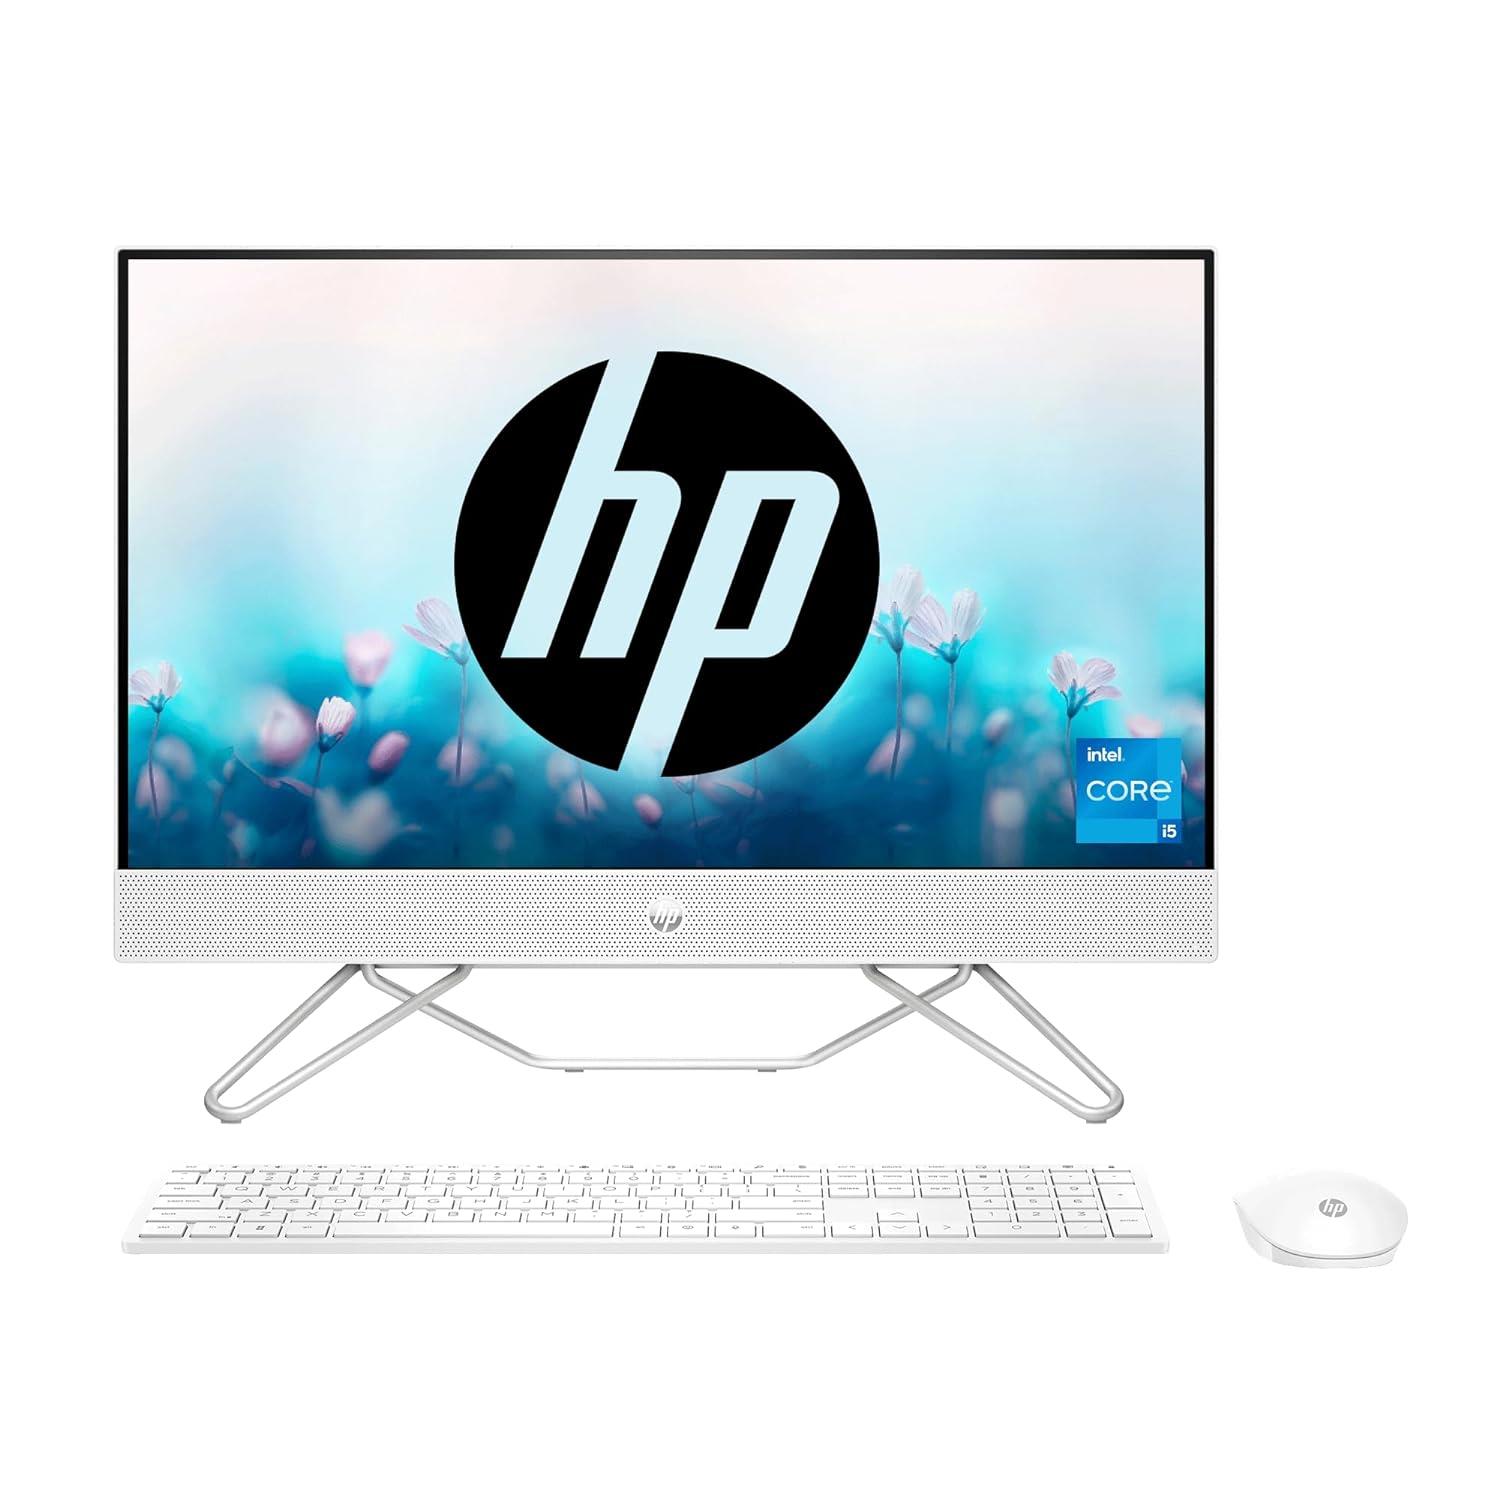 HP All-In-One PC 12Th Gen Intel Core I5-1235U 24-Inch(60.5 Cm) FHD Anti-Glare Desktop (8GB RAM/1TB HDD+256GB/Win 11/Wireless Keyboard And Mouse Combo/MSO/IR Privacy Camera/Starry White) 24-Cb1902in